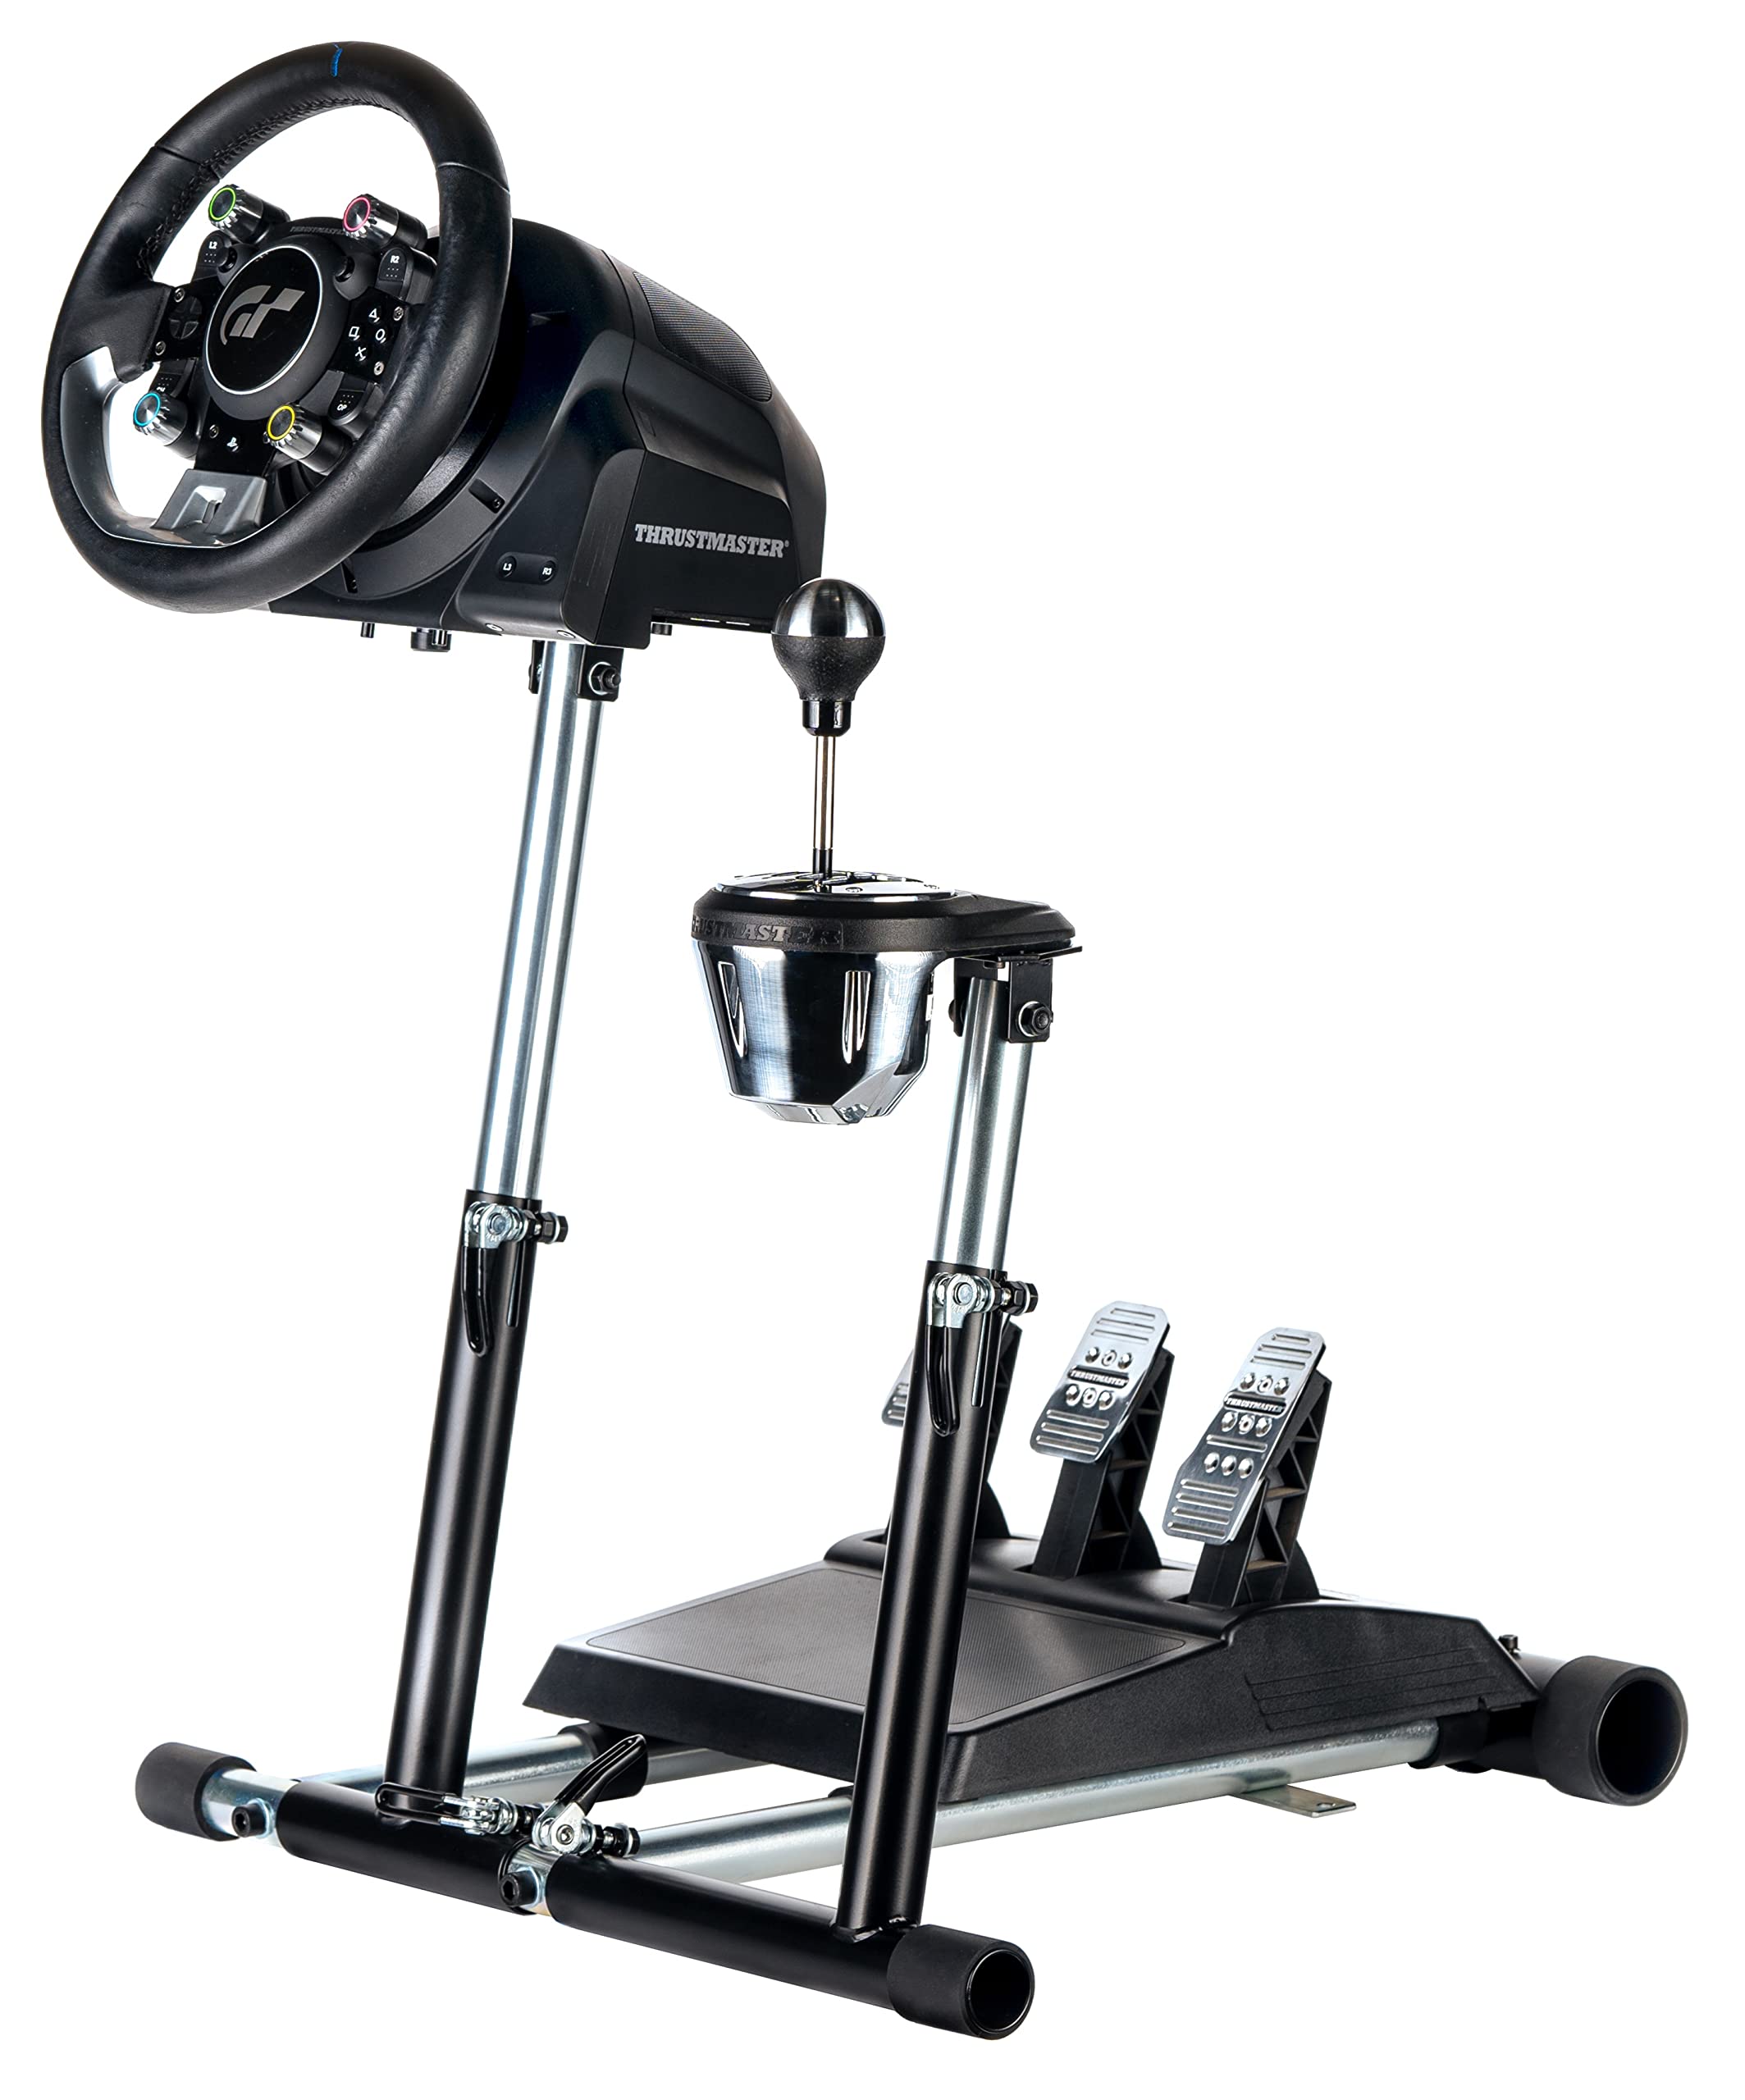 Wheel Stand Pro SuperTX Stand Compatible With Thrustmaster T300RS, T248, TX Leather, T150/T150 Pro/TMX/TMX Pro,GT, TX, TS-XW, TS-PC, T300GT, T-GT, T-GT II & T500RS Wheel & Pedals Not included